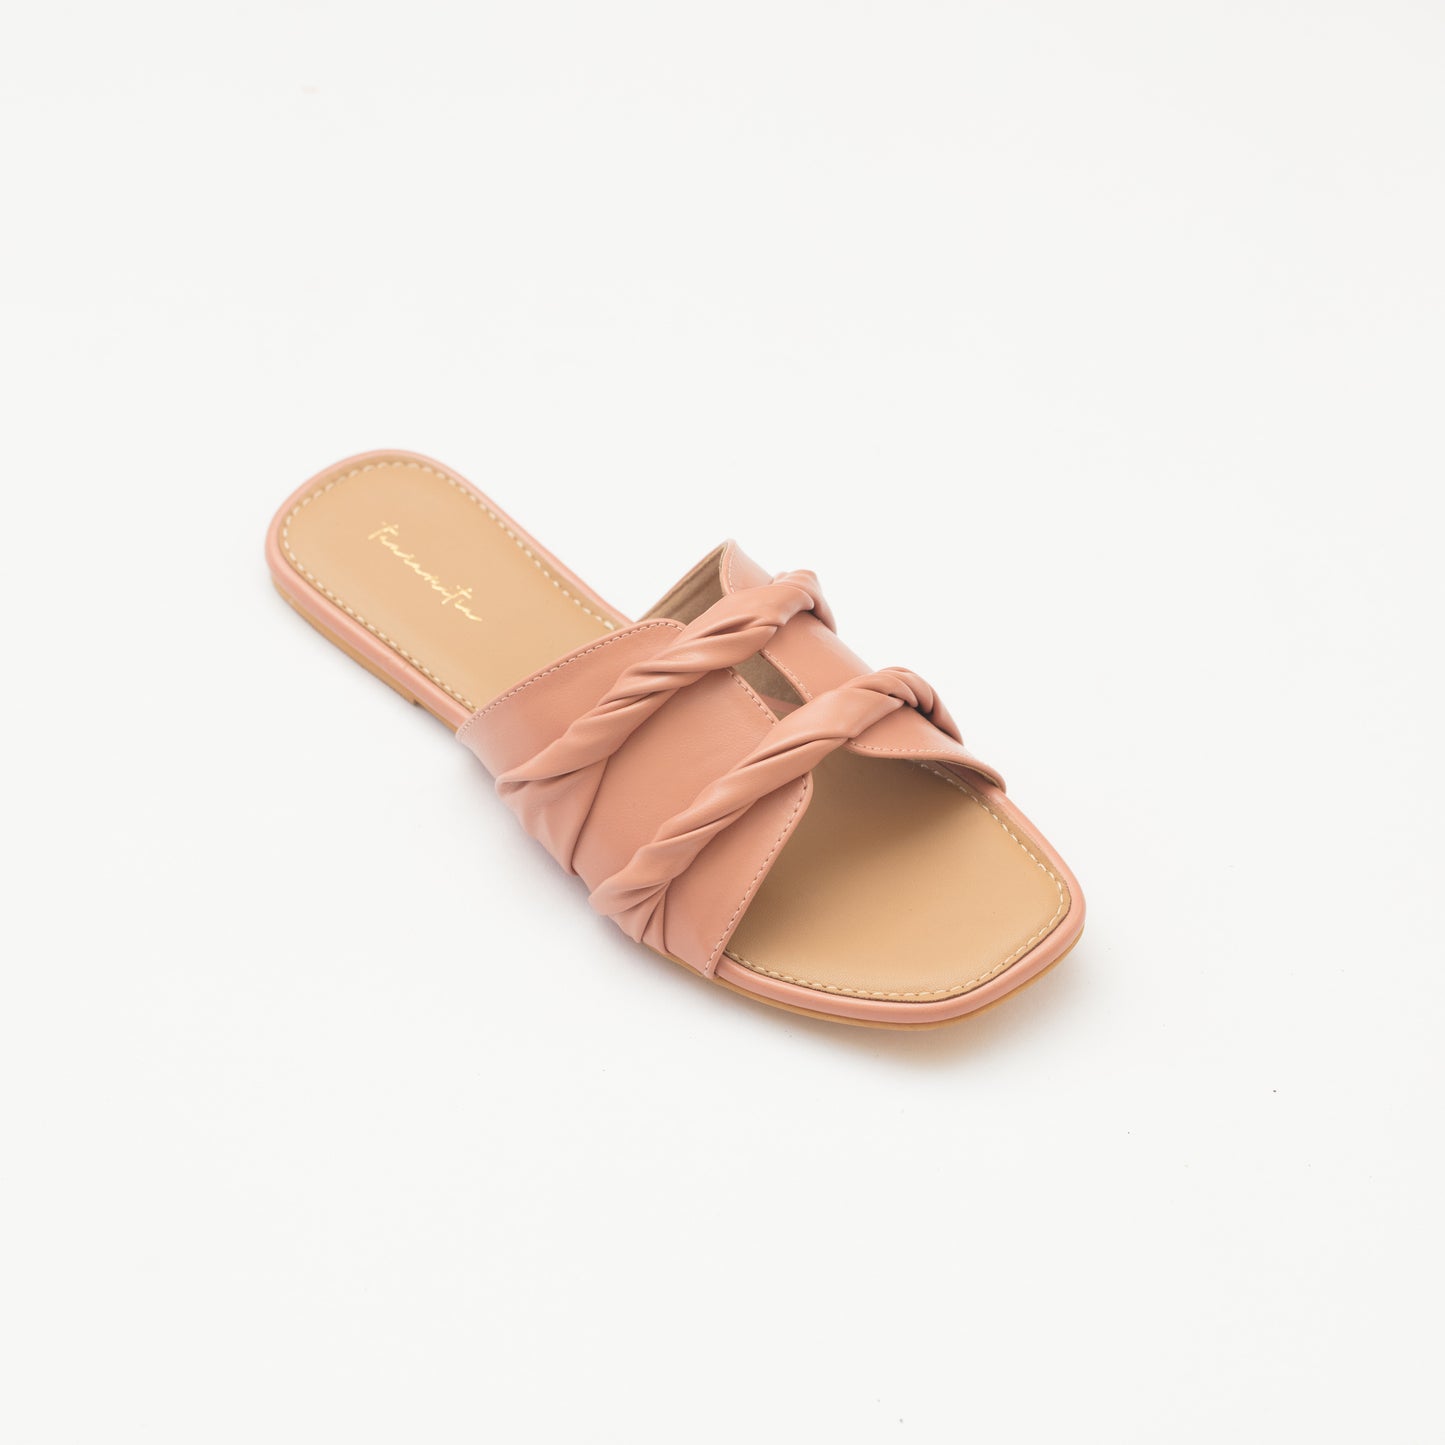 Knotted see through flats in peach